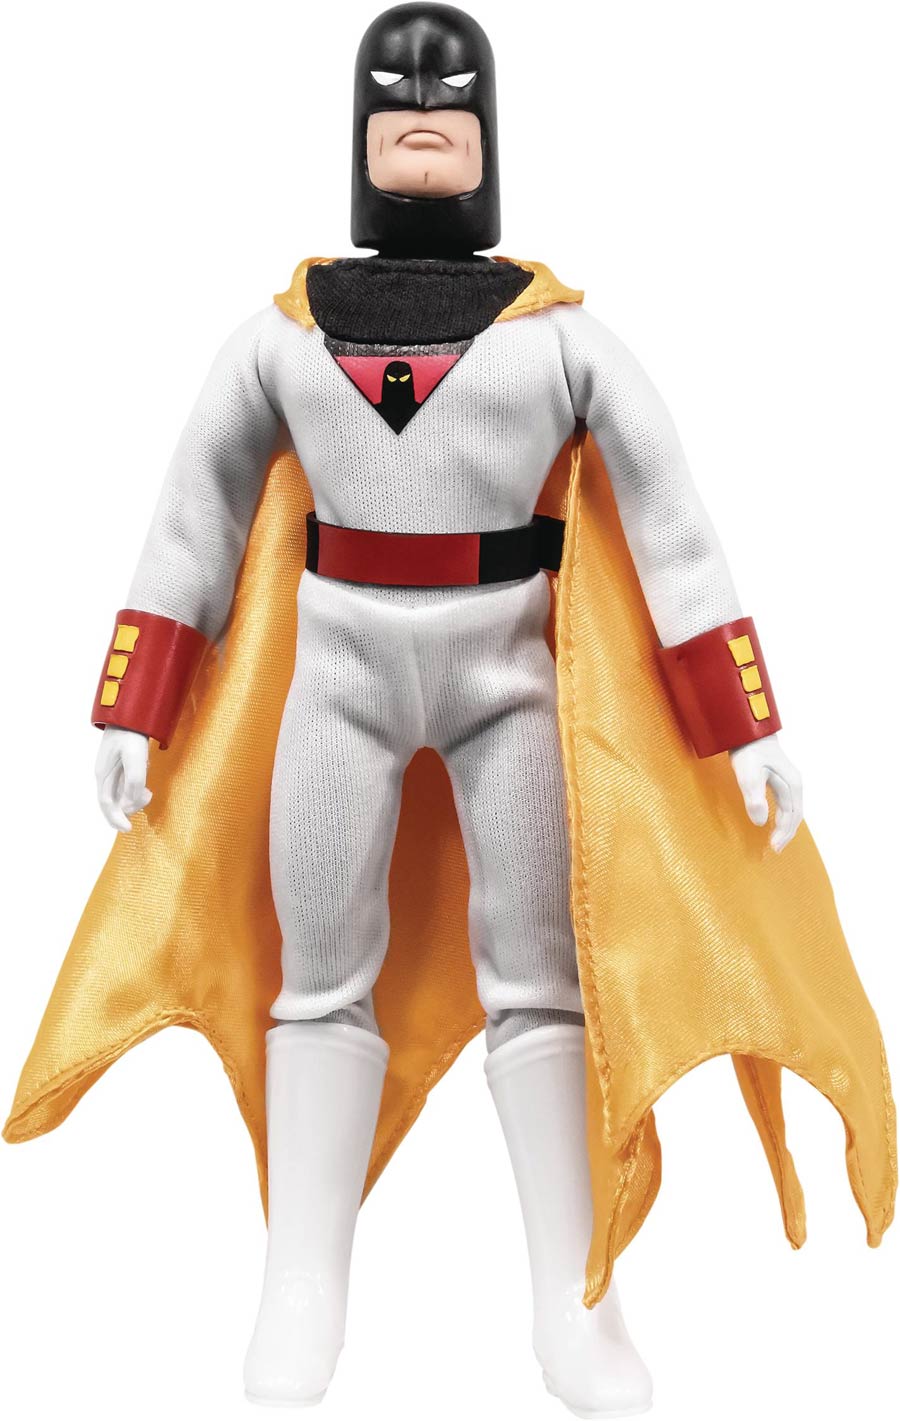 Hanna-Barbera Space Ghost Space Ghost 8-Inch Action Figure